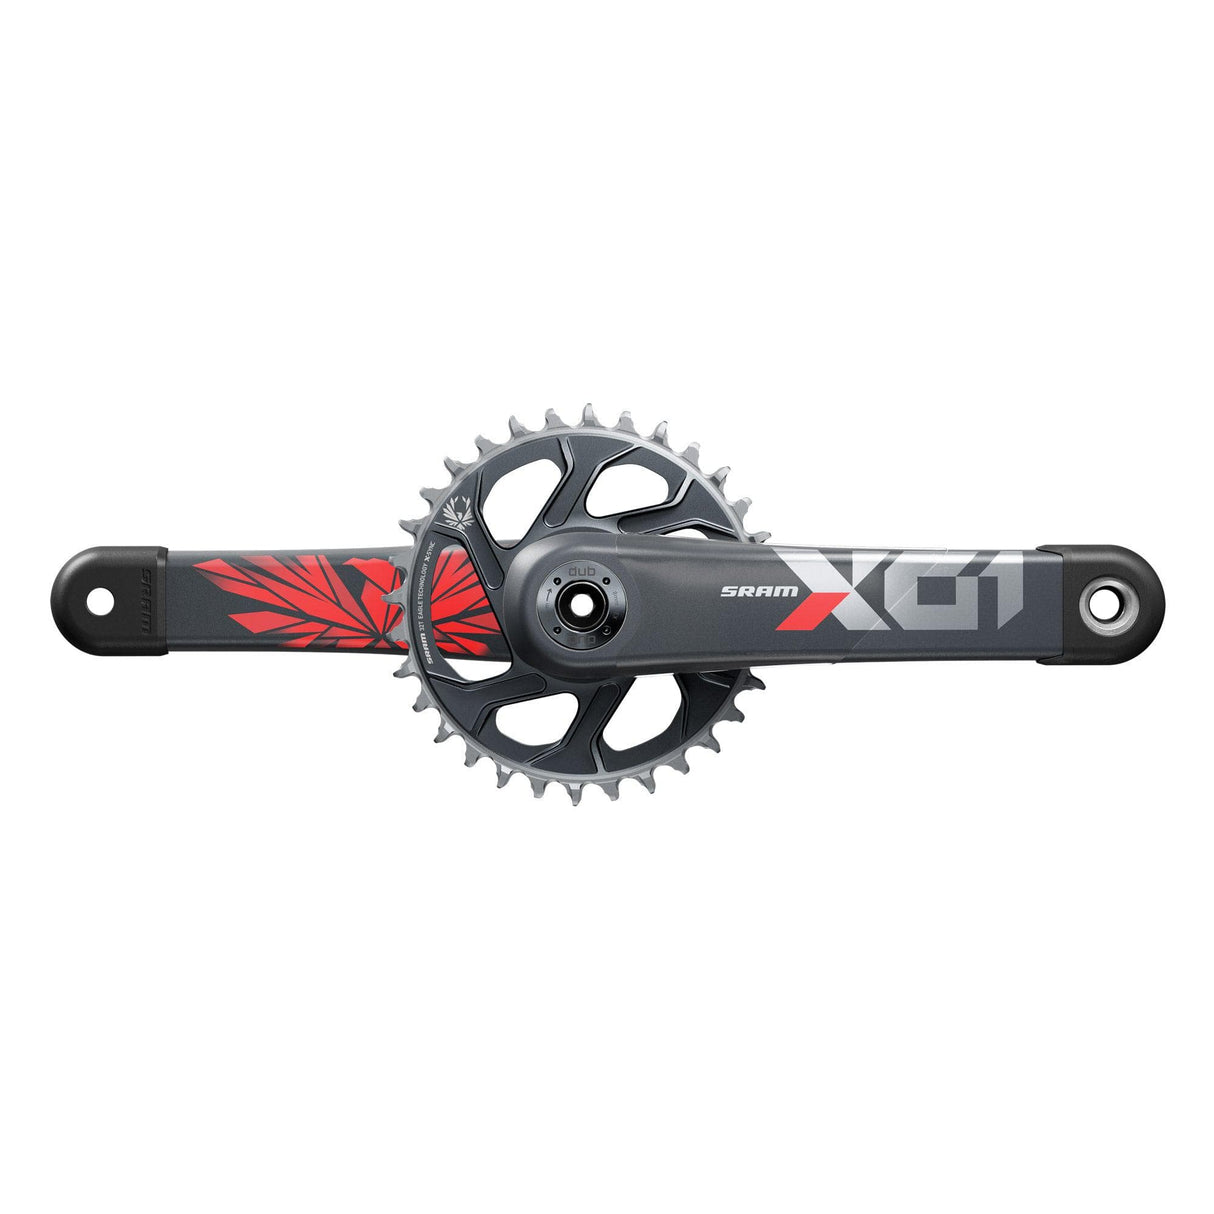 Sram Crankset X01 Eagle Superboost+ Dub 12S W Direct Mount 32T X-Sync 2 Chainring (Dub Cups/Bearings Not Included) C3: Lunar Oxy 175Mm